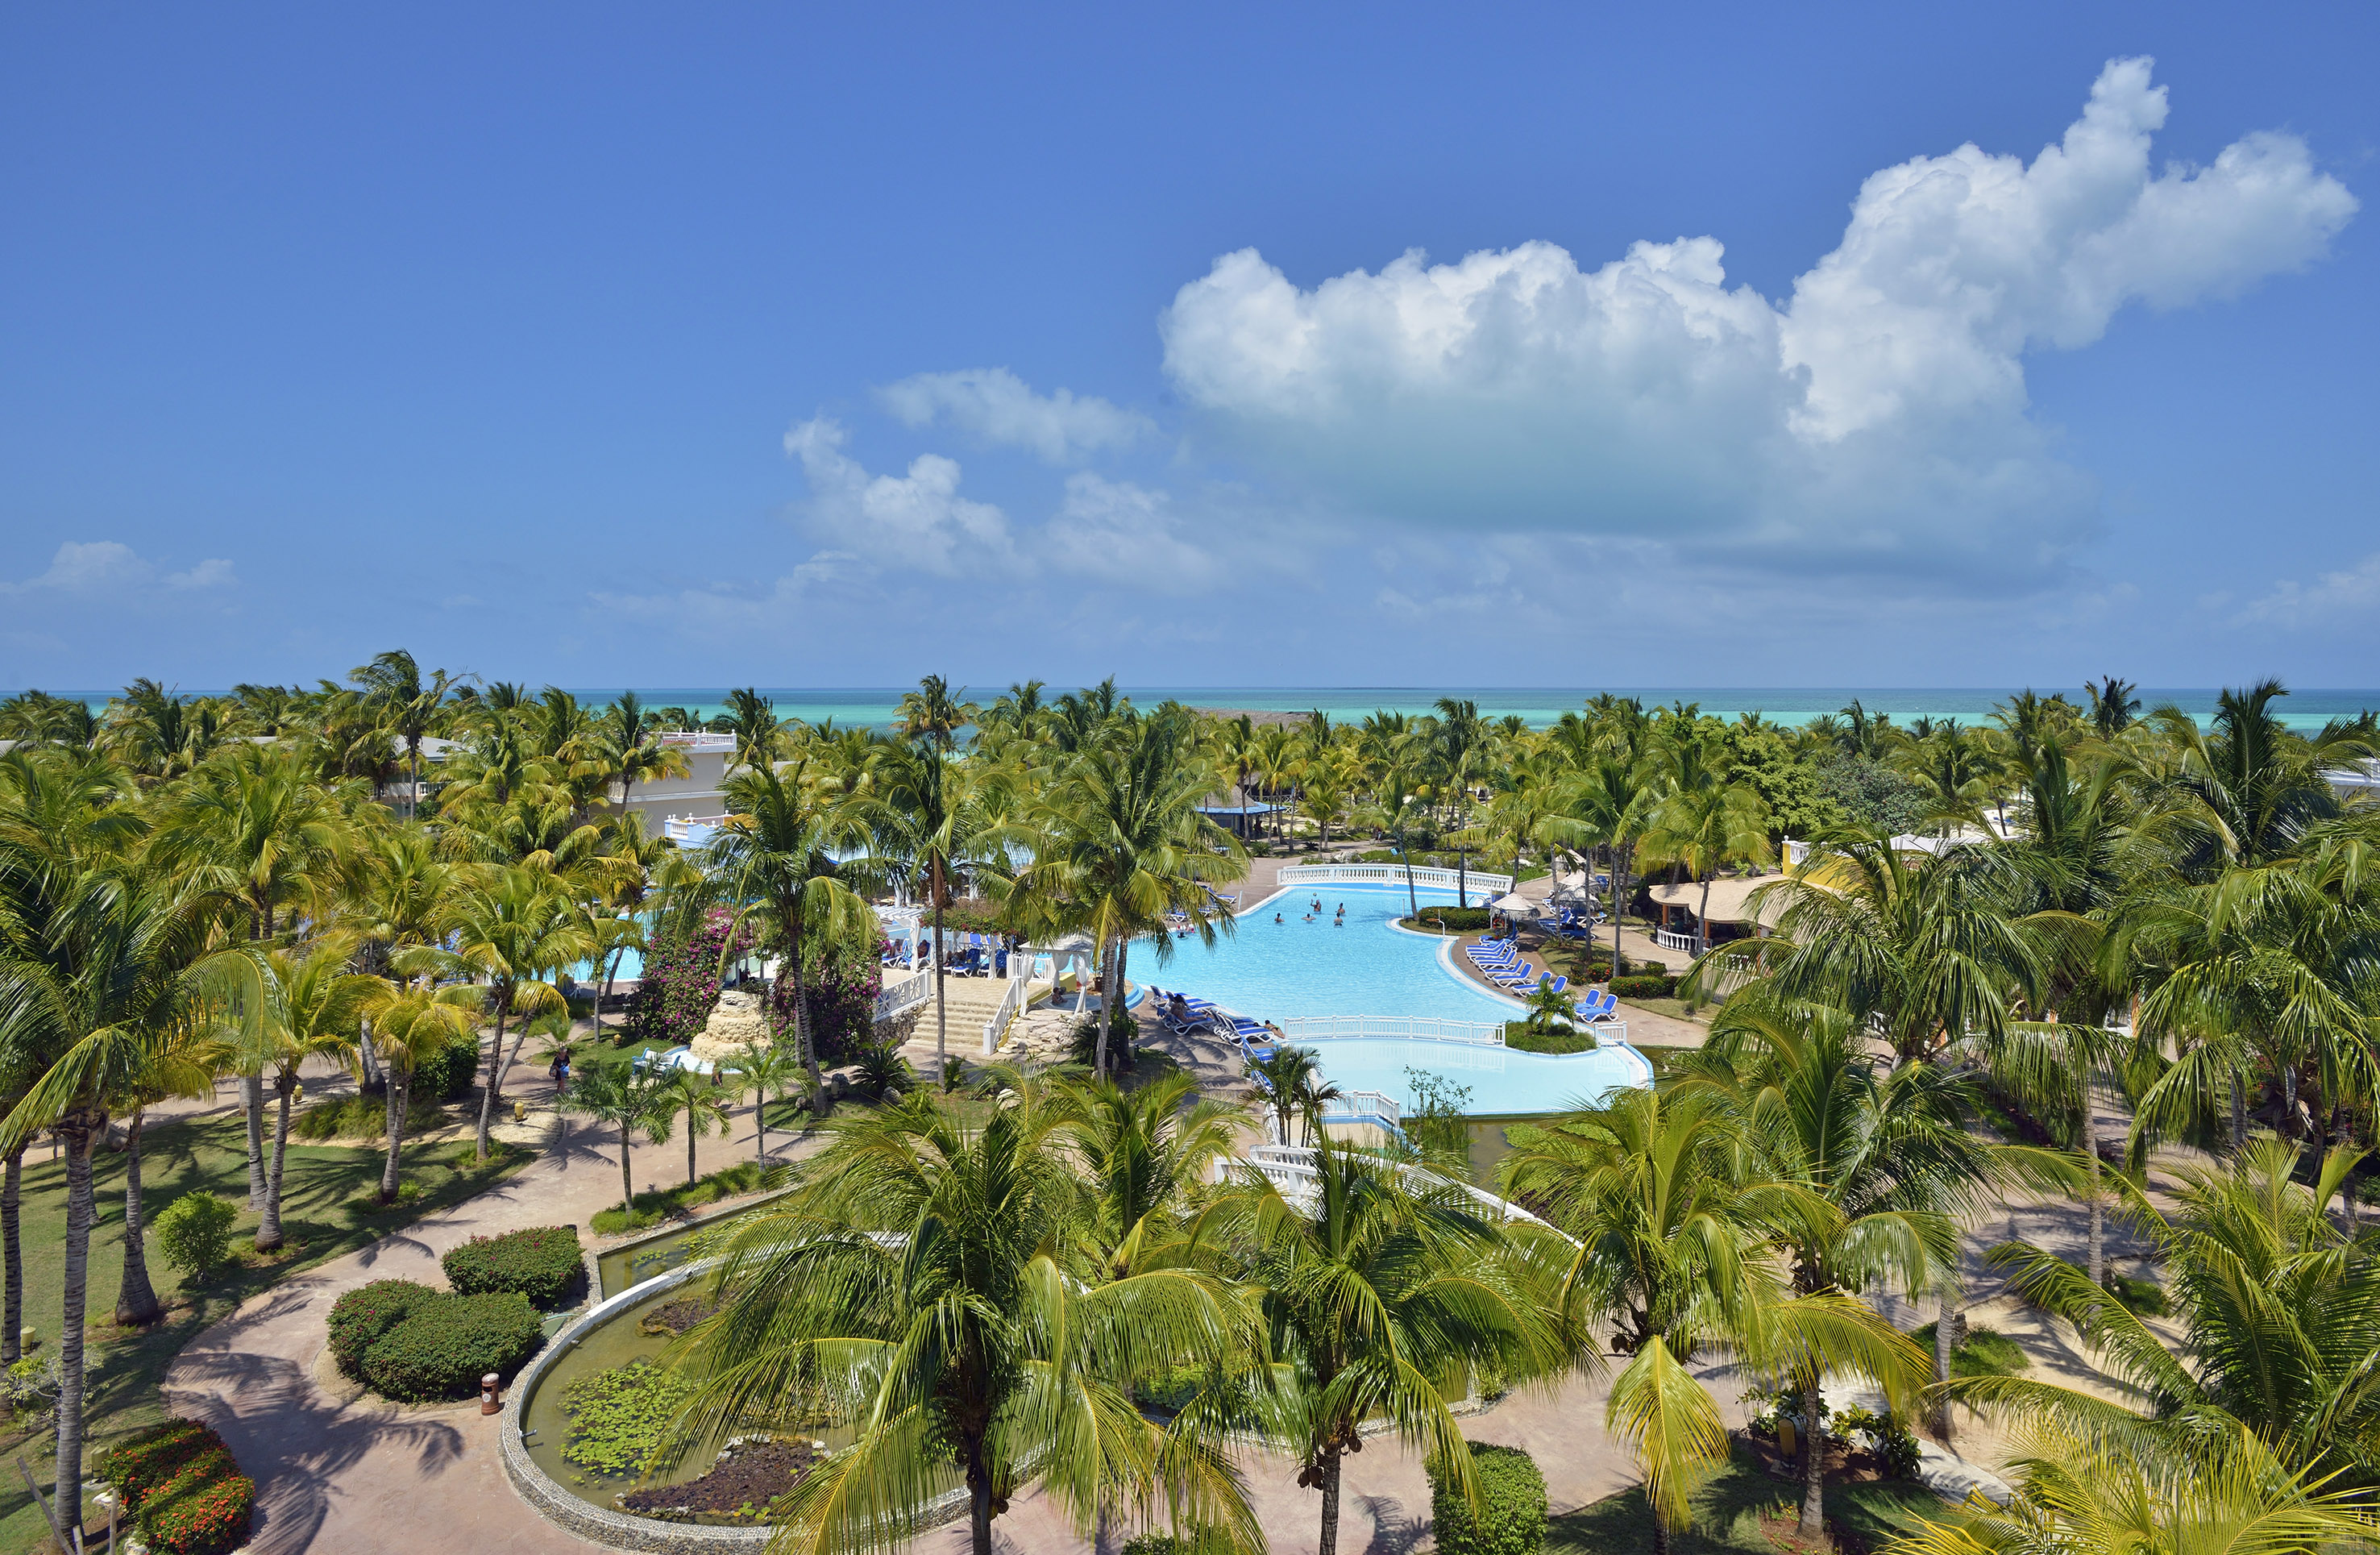 Melia Cayo Guillermo Hotel (Cayo Guillermo) from £108 | lastminute.com